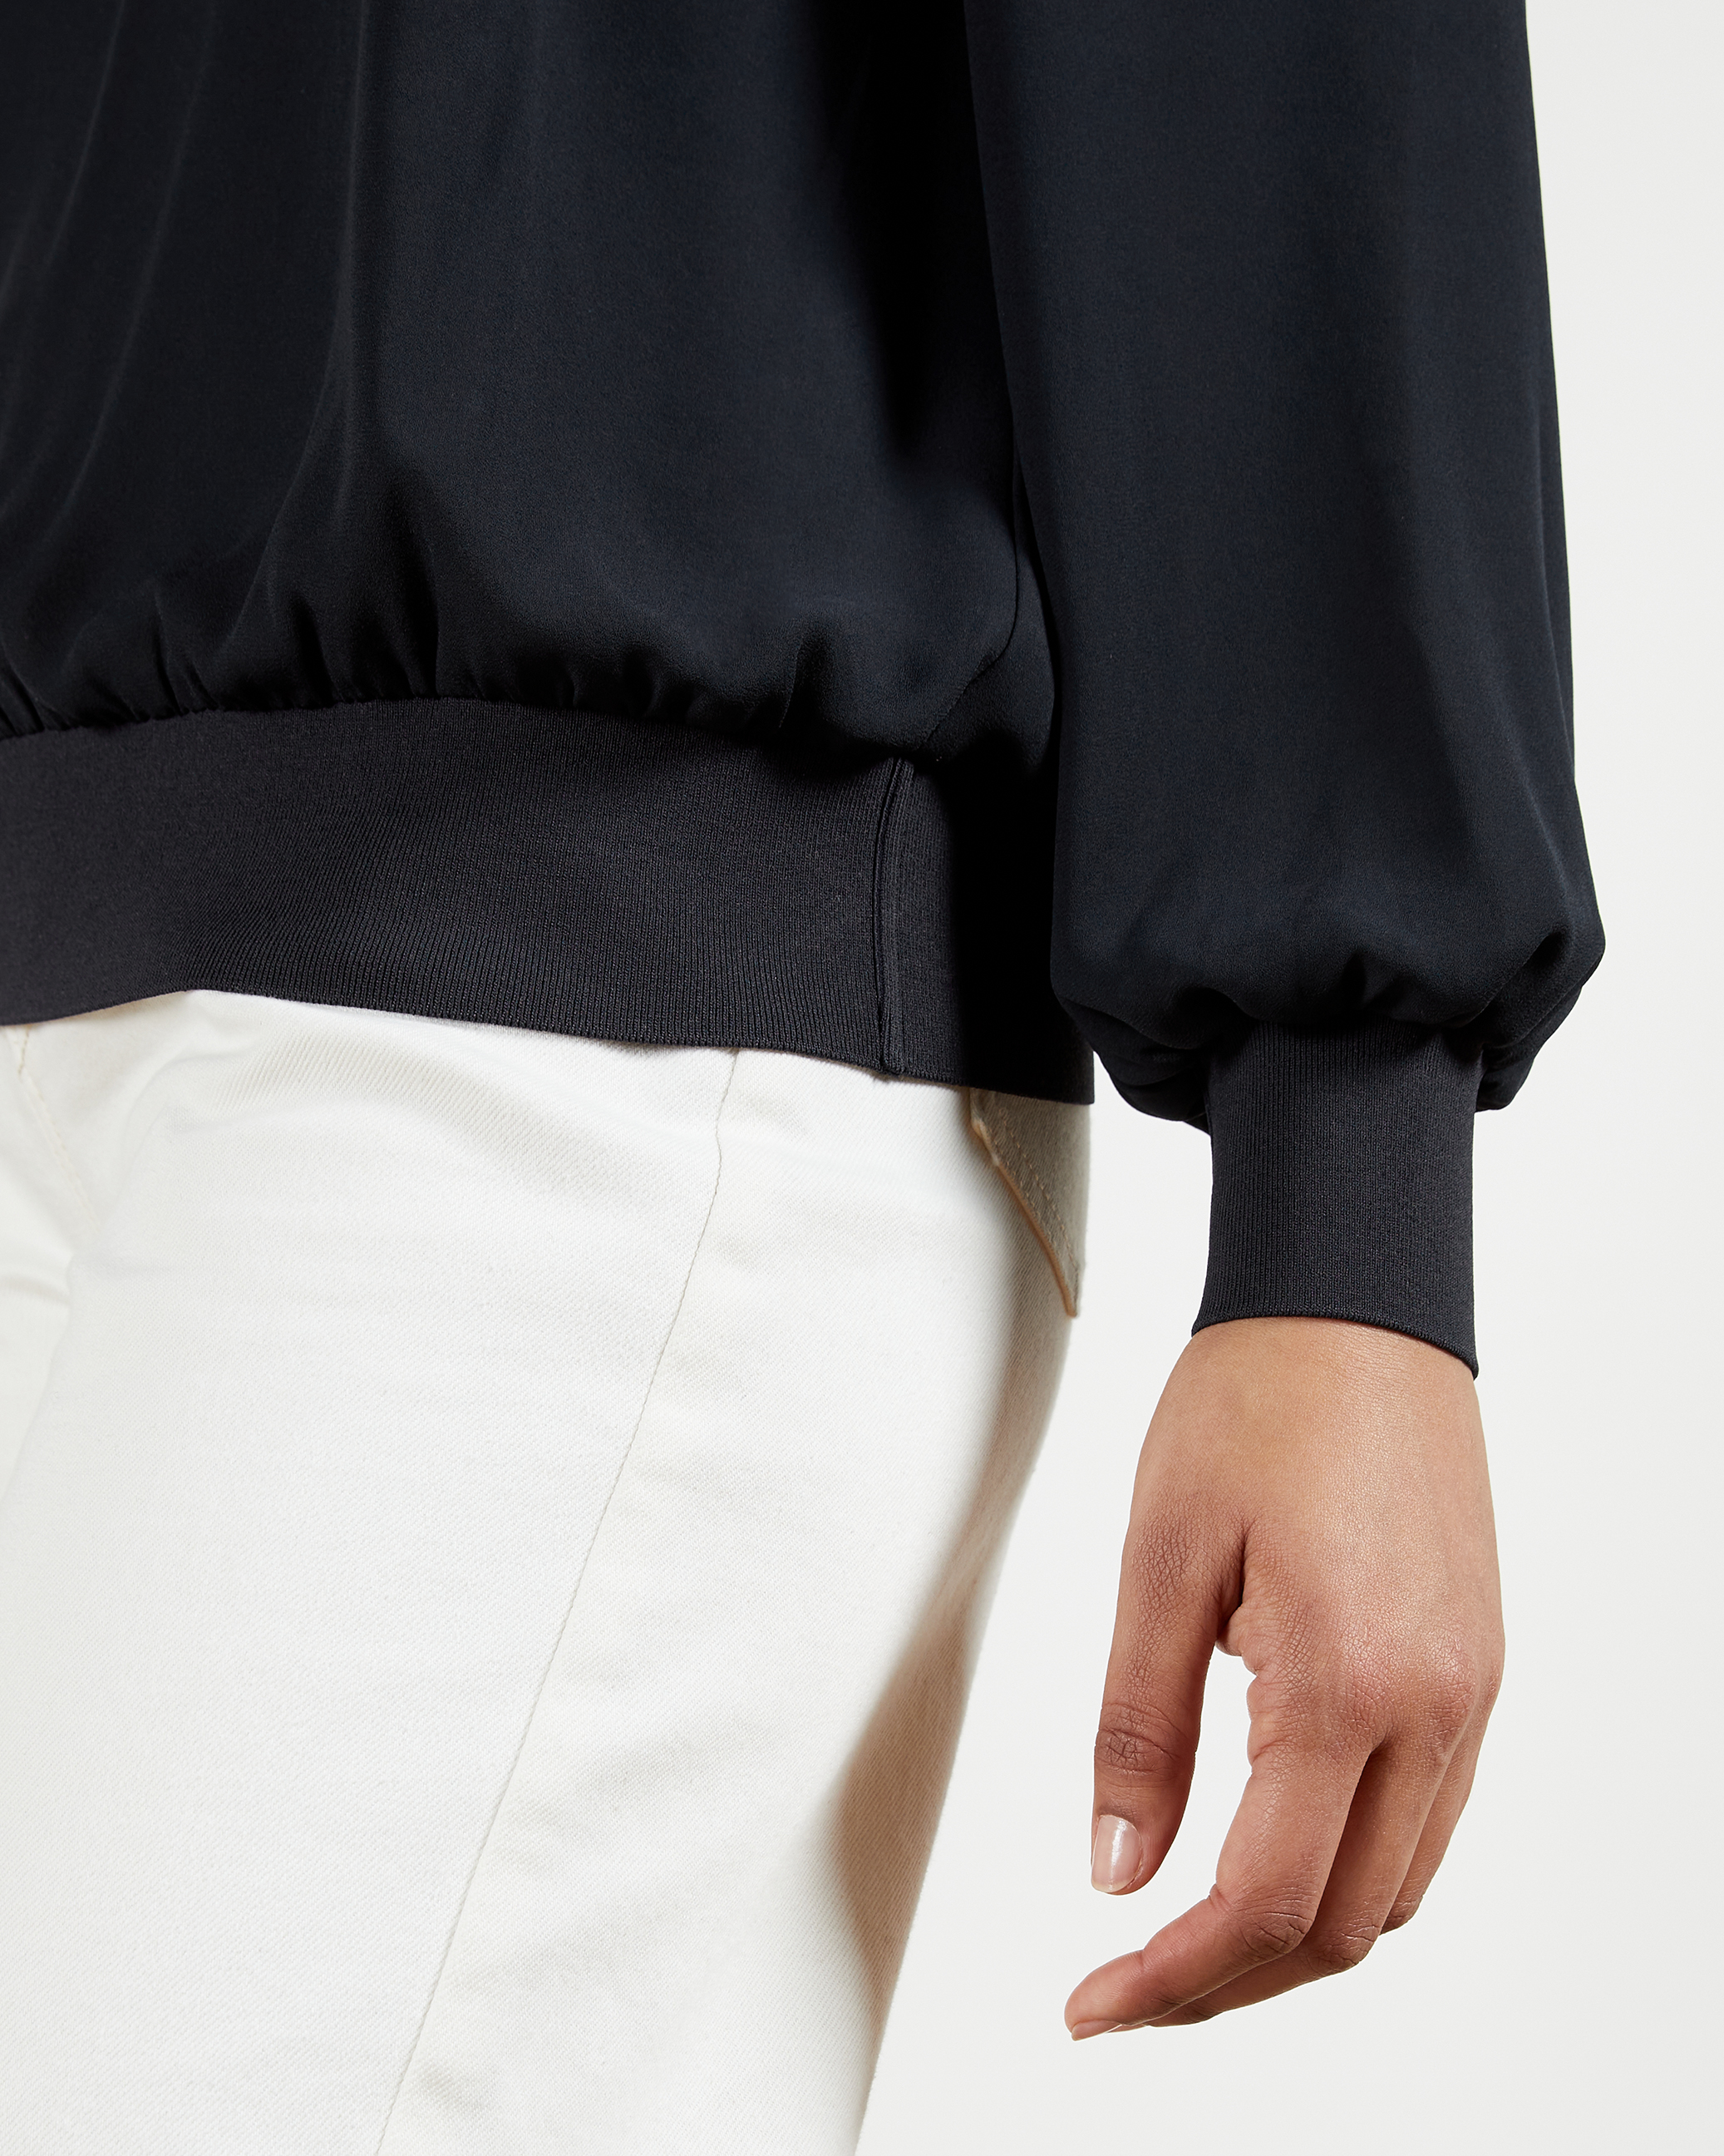 Scarf Detail Blouse - Navy | Tops & T-Shirts | Ted Baker